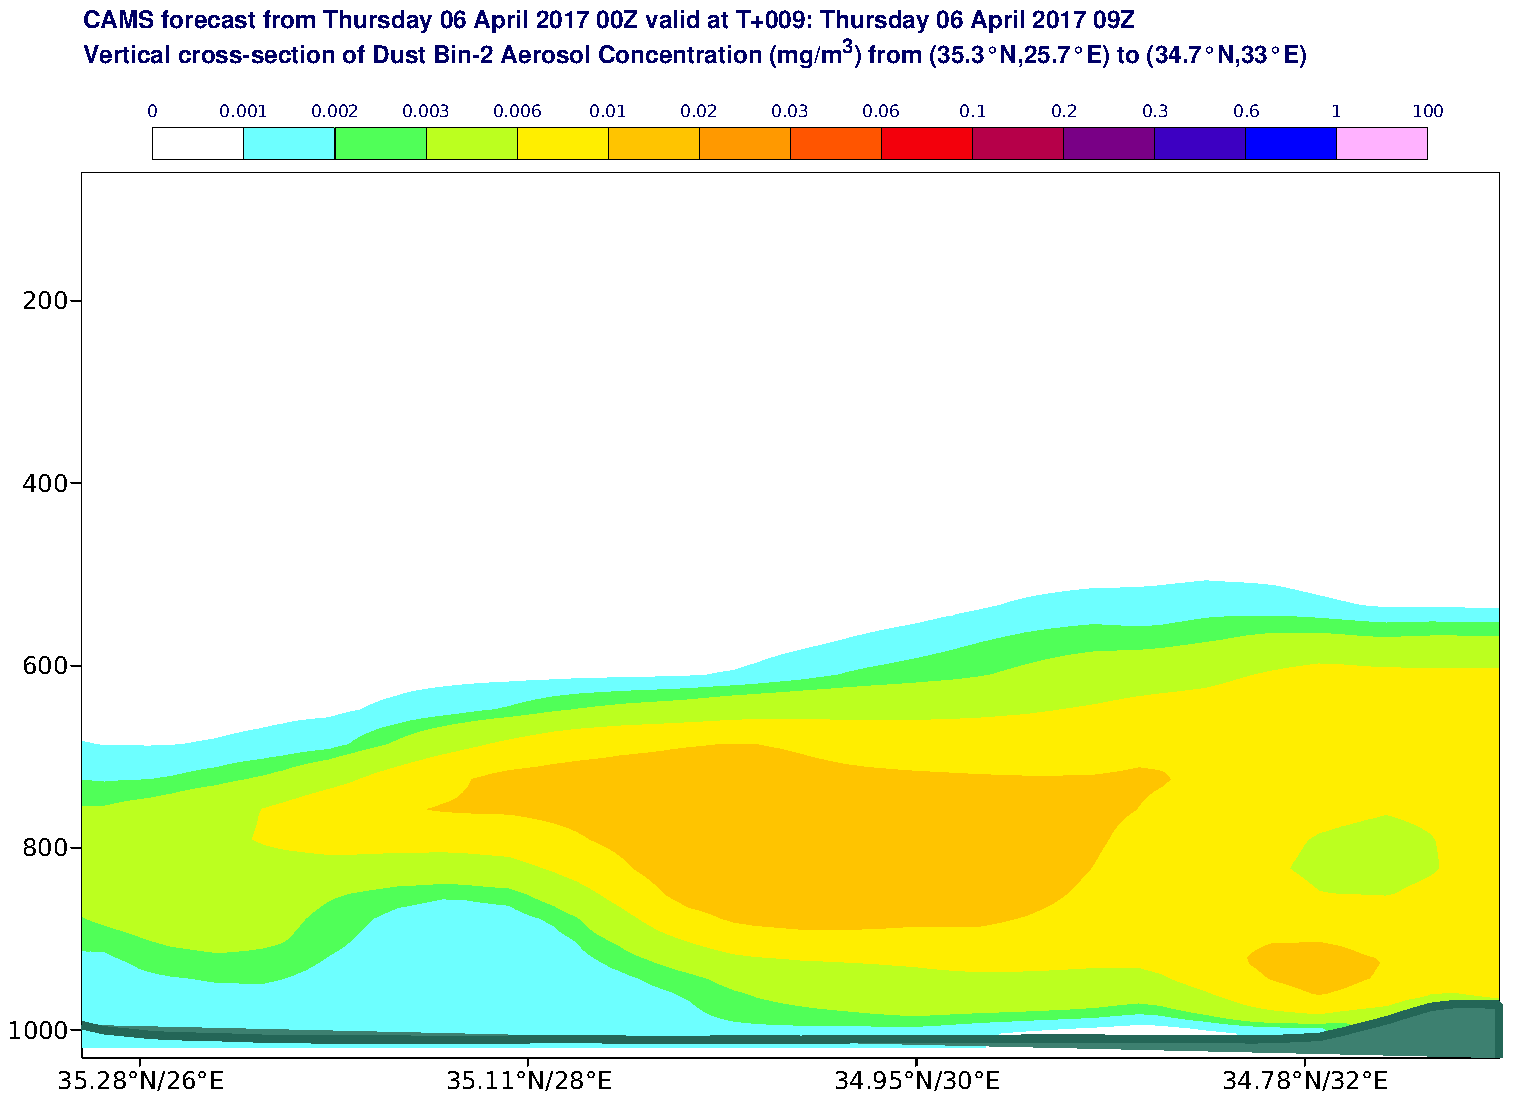 Vertical cross-section of Dust Bin-2 Aerosol Concentration (mg/m3) valid at T9 - 2017-04-06 09:00